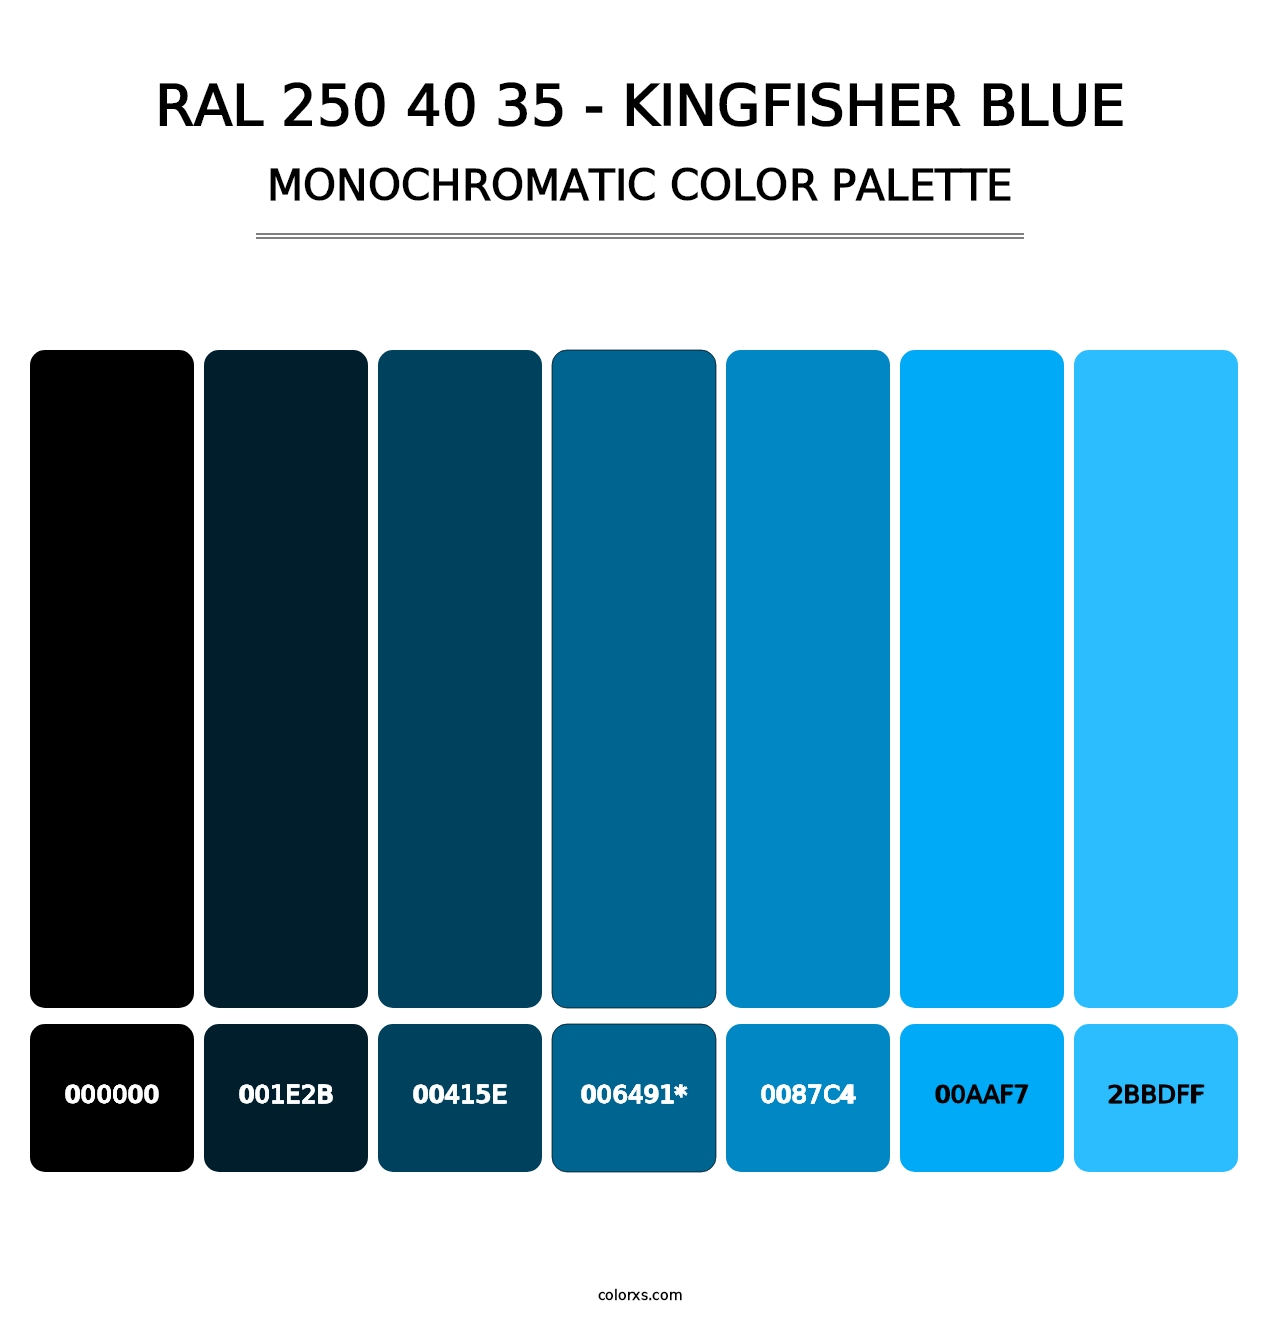 RAL 250 40 35 - Kingfisher Blue - Monochromatic Color Palette